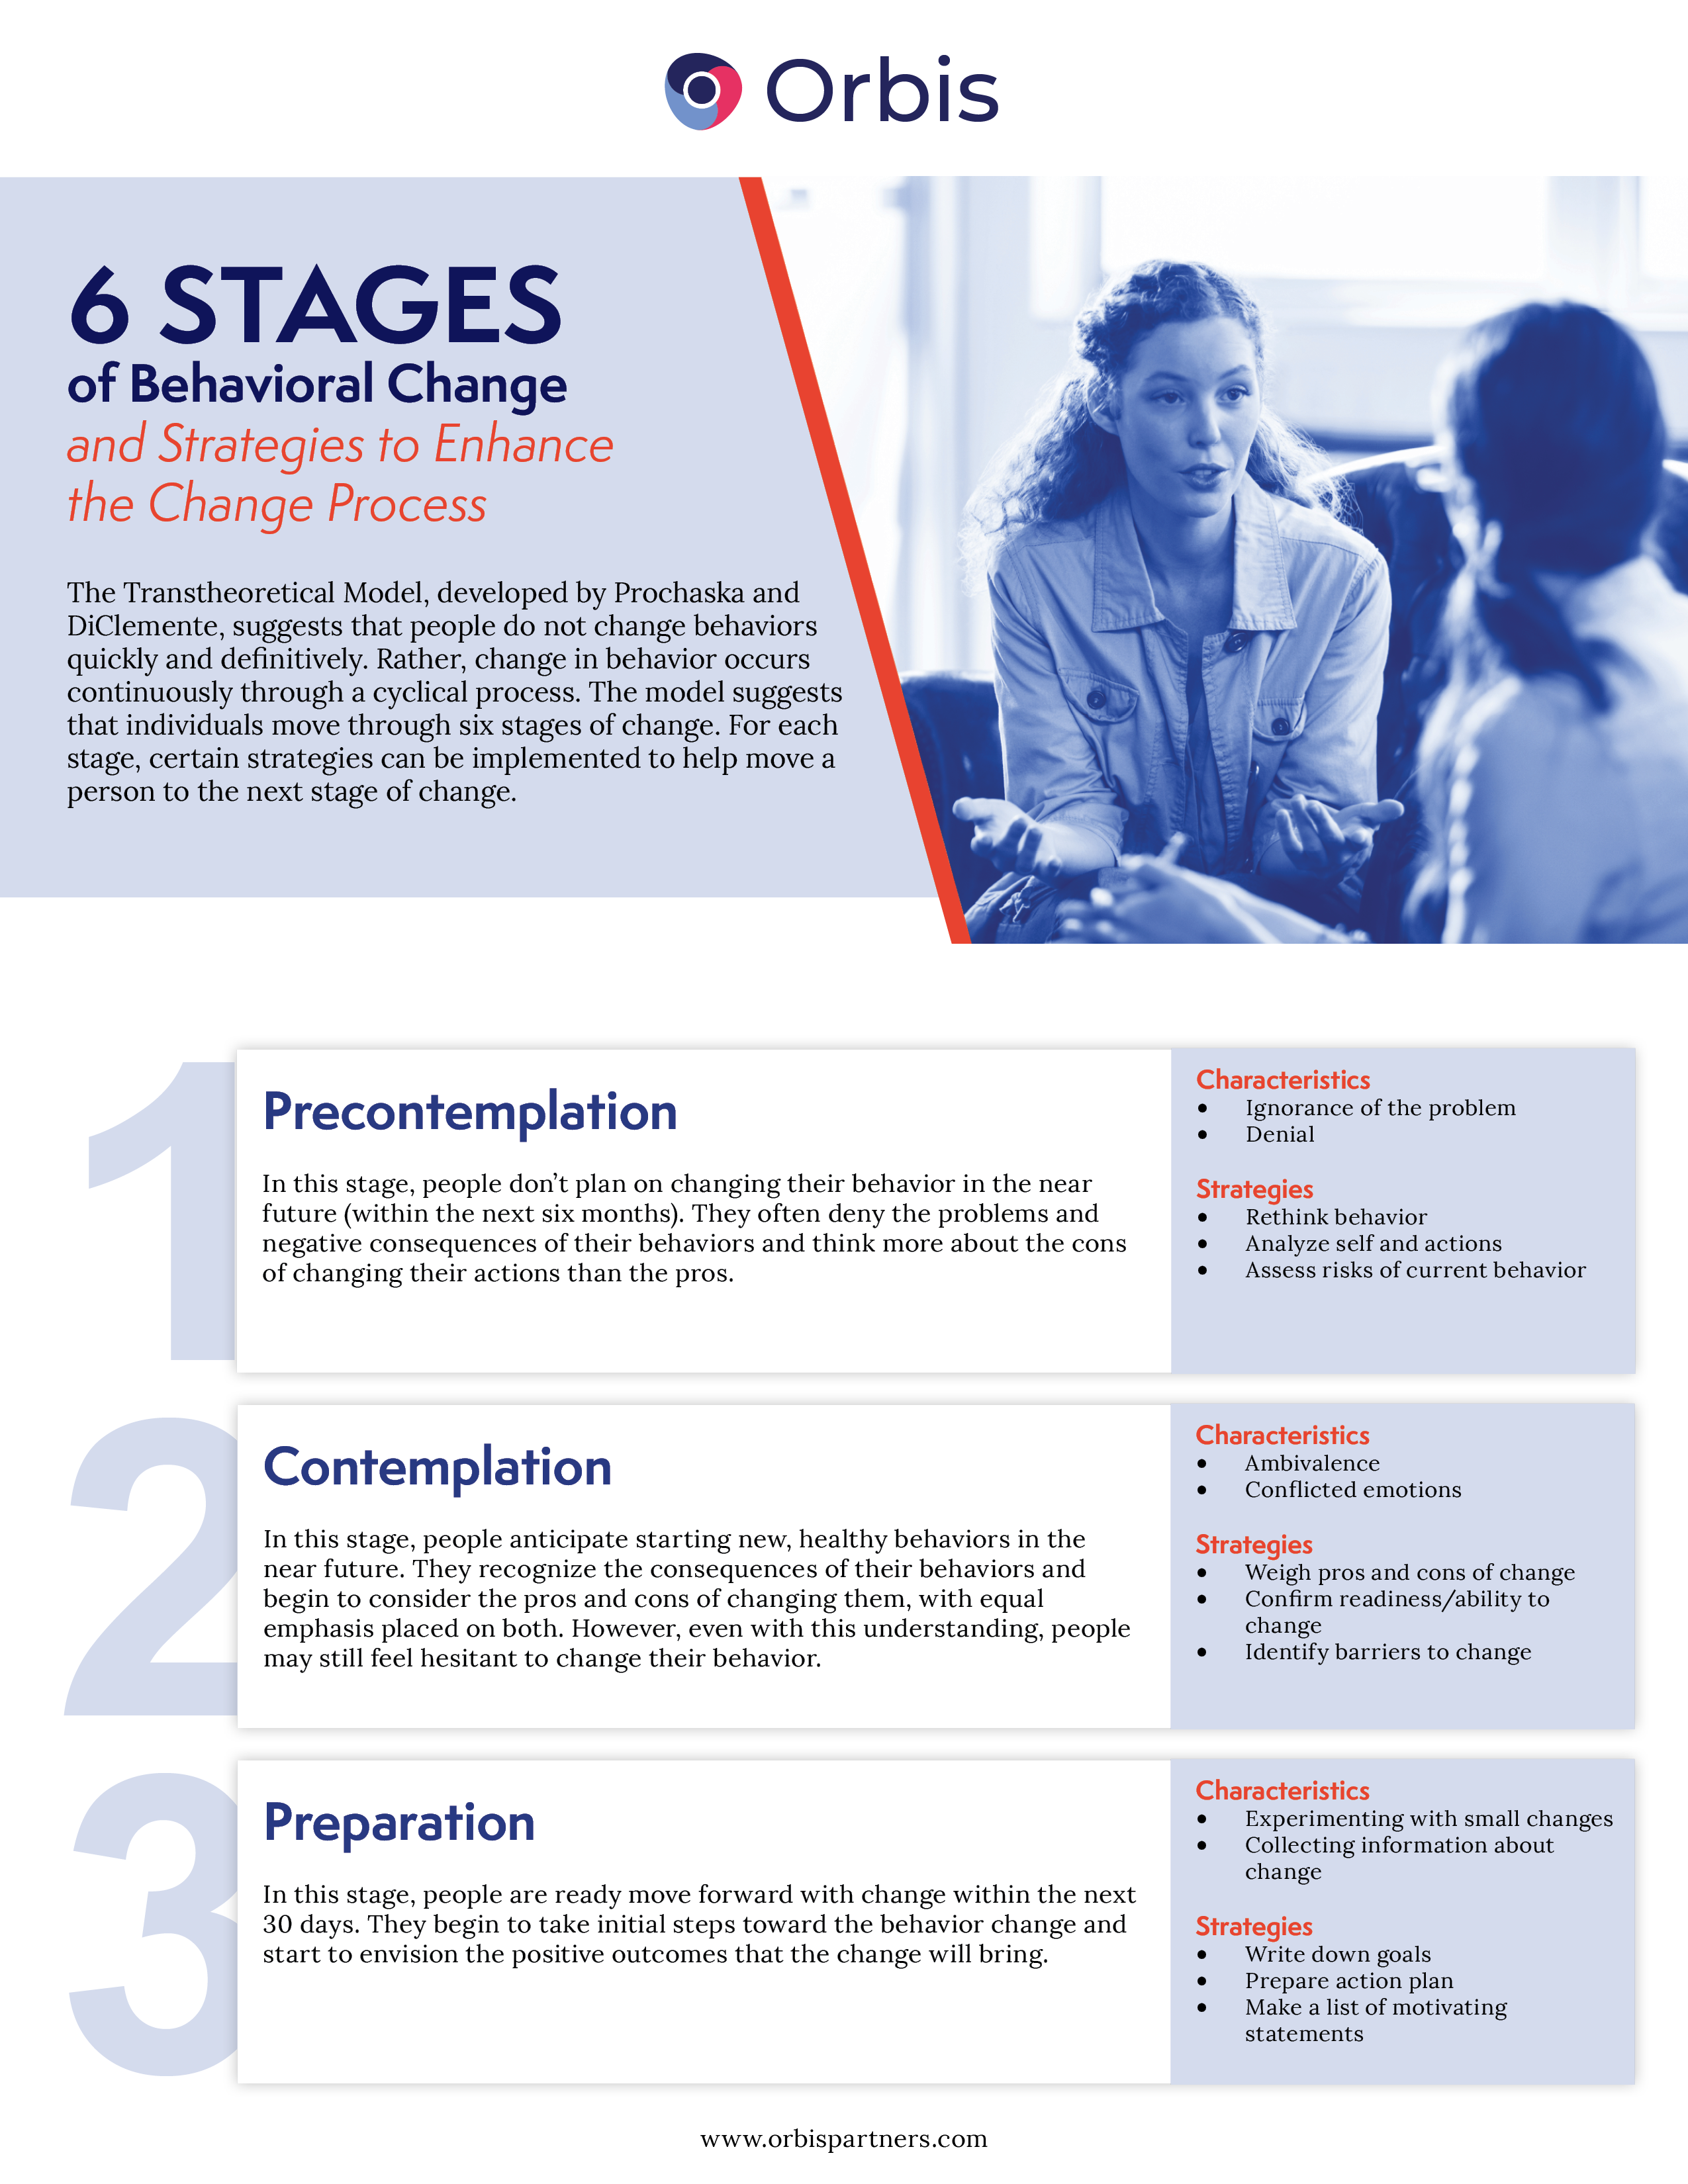 The 6 Stages of Behavior Change: A How-To Guide